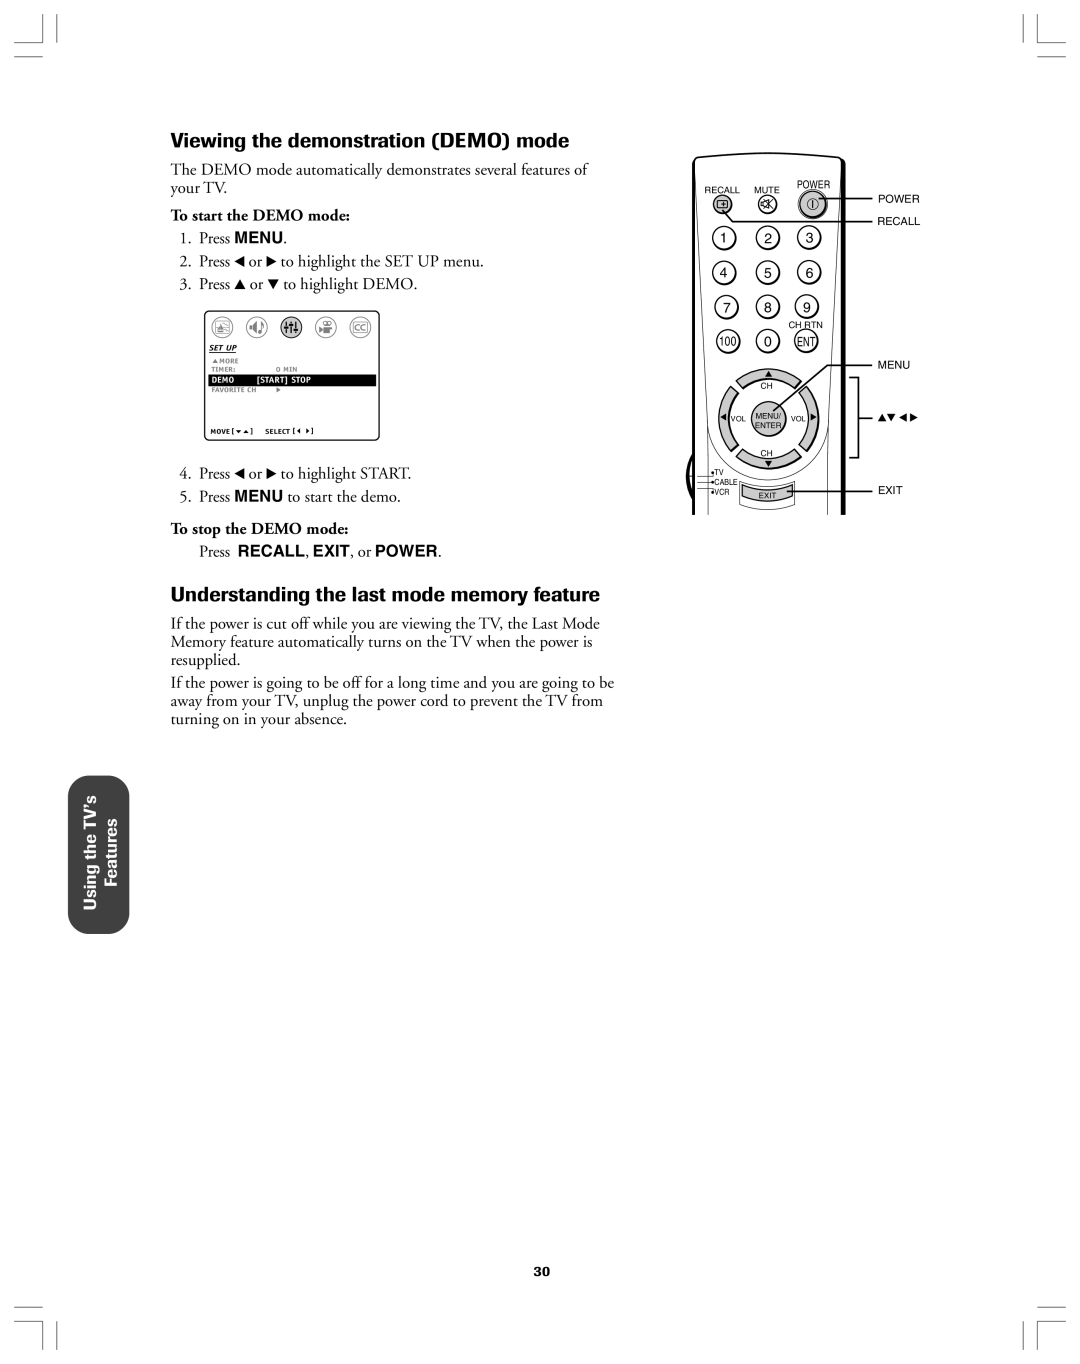 Toshiba 34AS42 owner manual Viewing the demonstration DEMO mode, Understanding the last mode memory feature, Features 